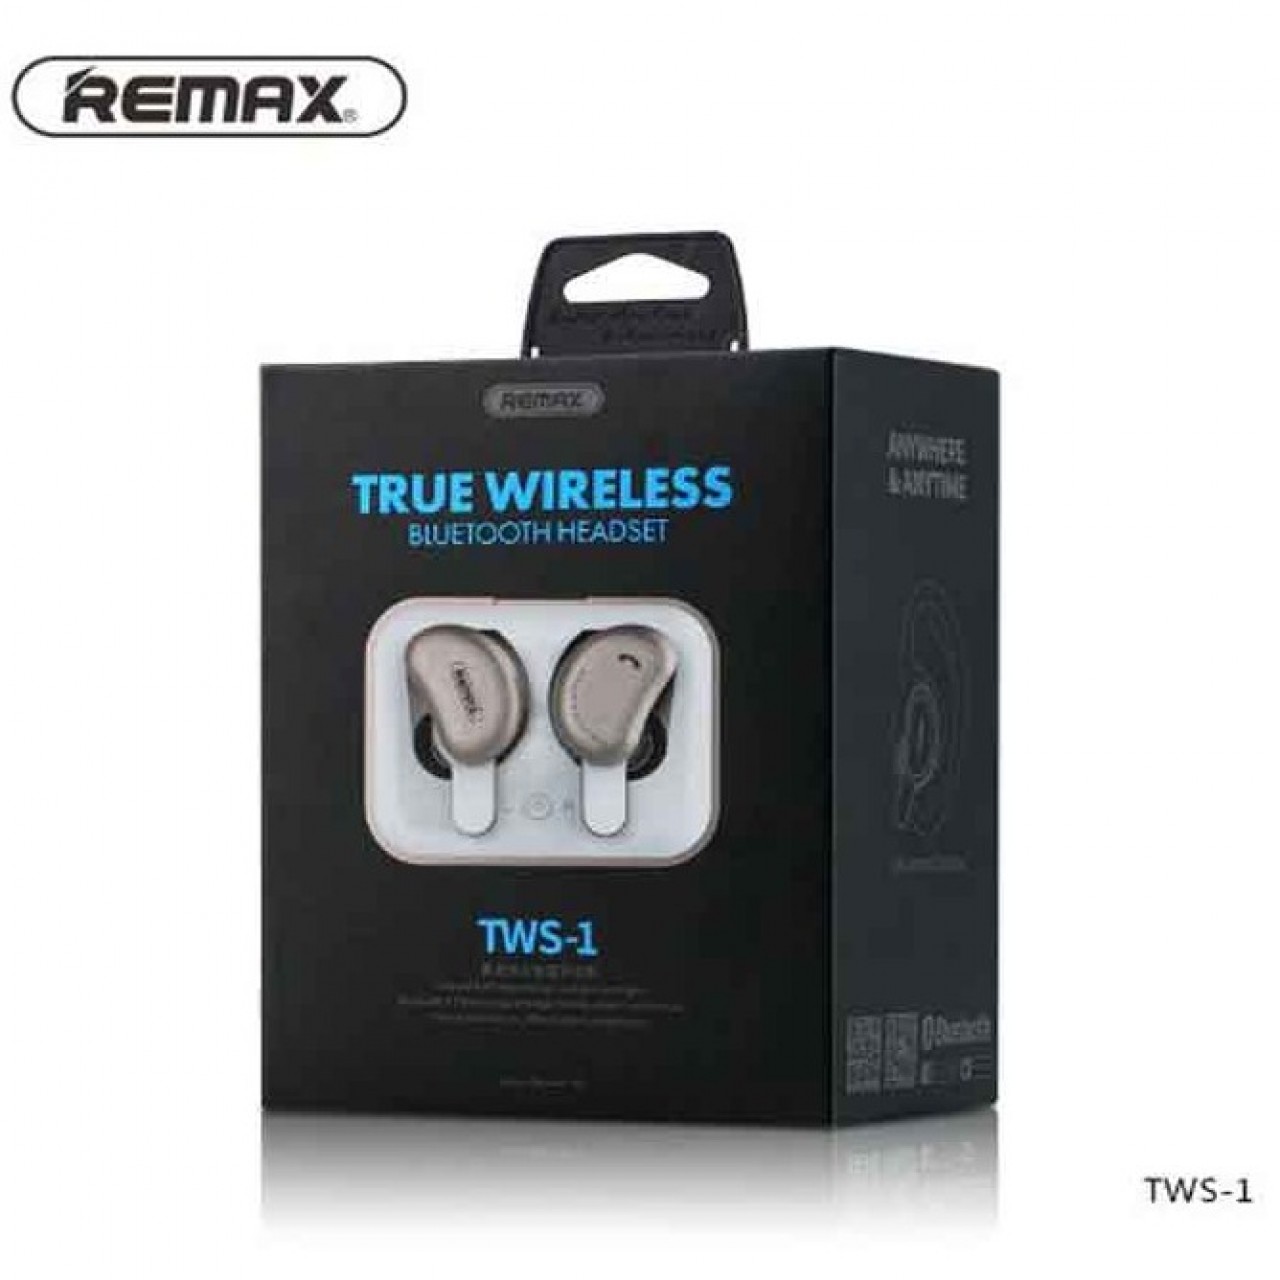 Remax TWS-1 New Bluetooth Earphone Wireless 3D Stereo Earphones Mini Stereo Headset with Charging